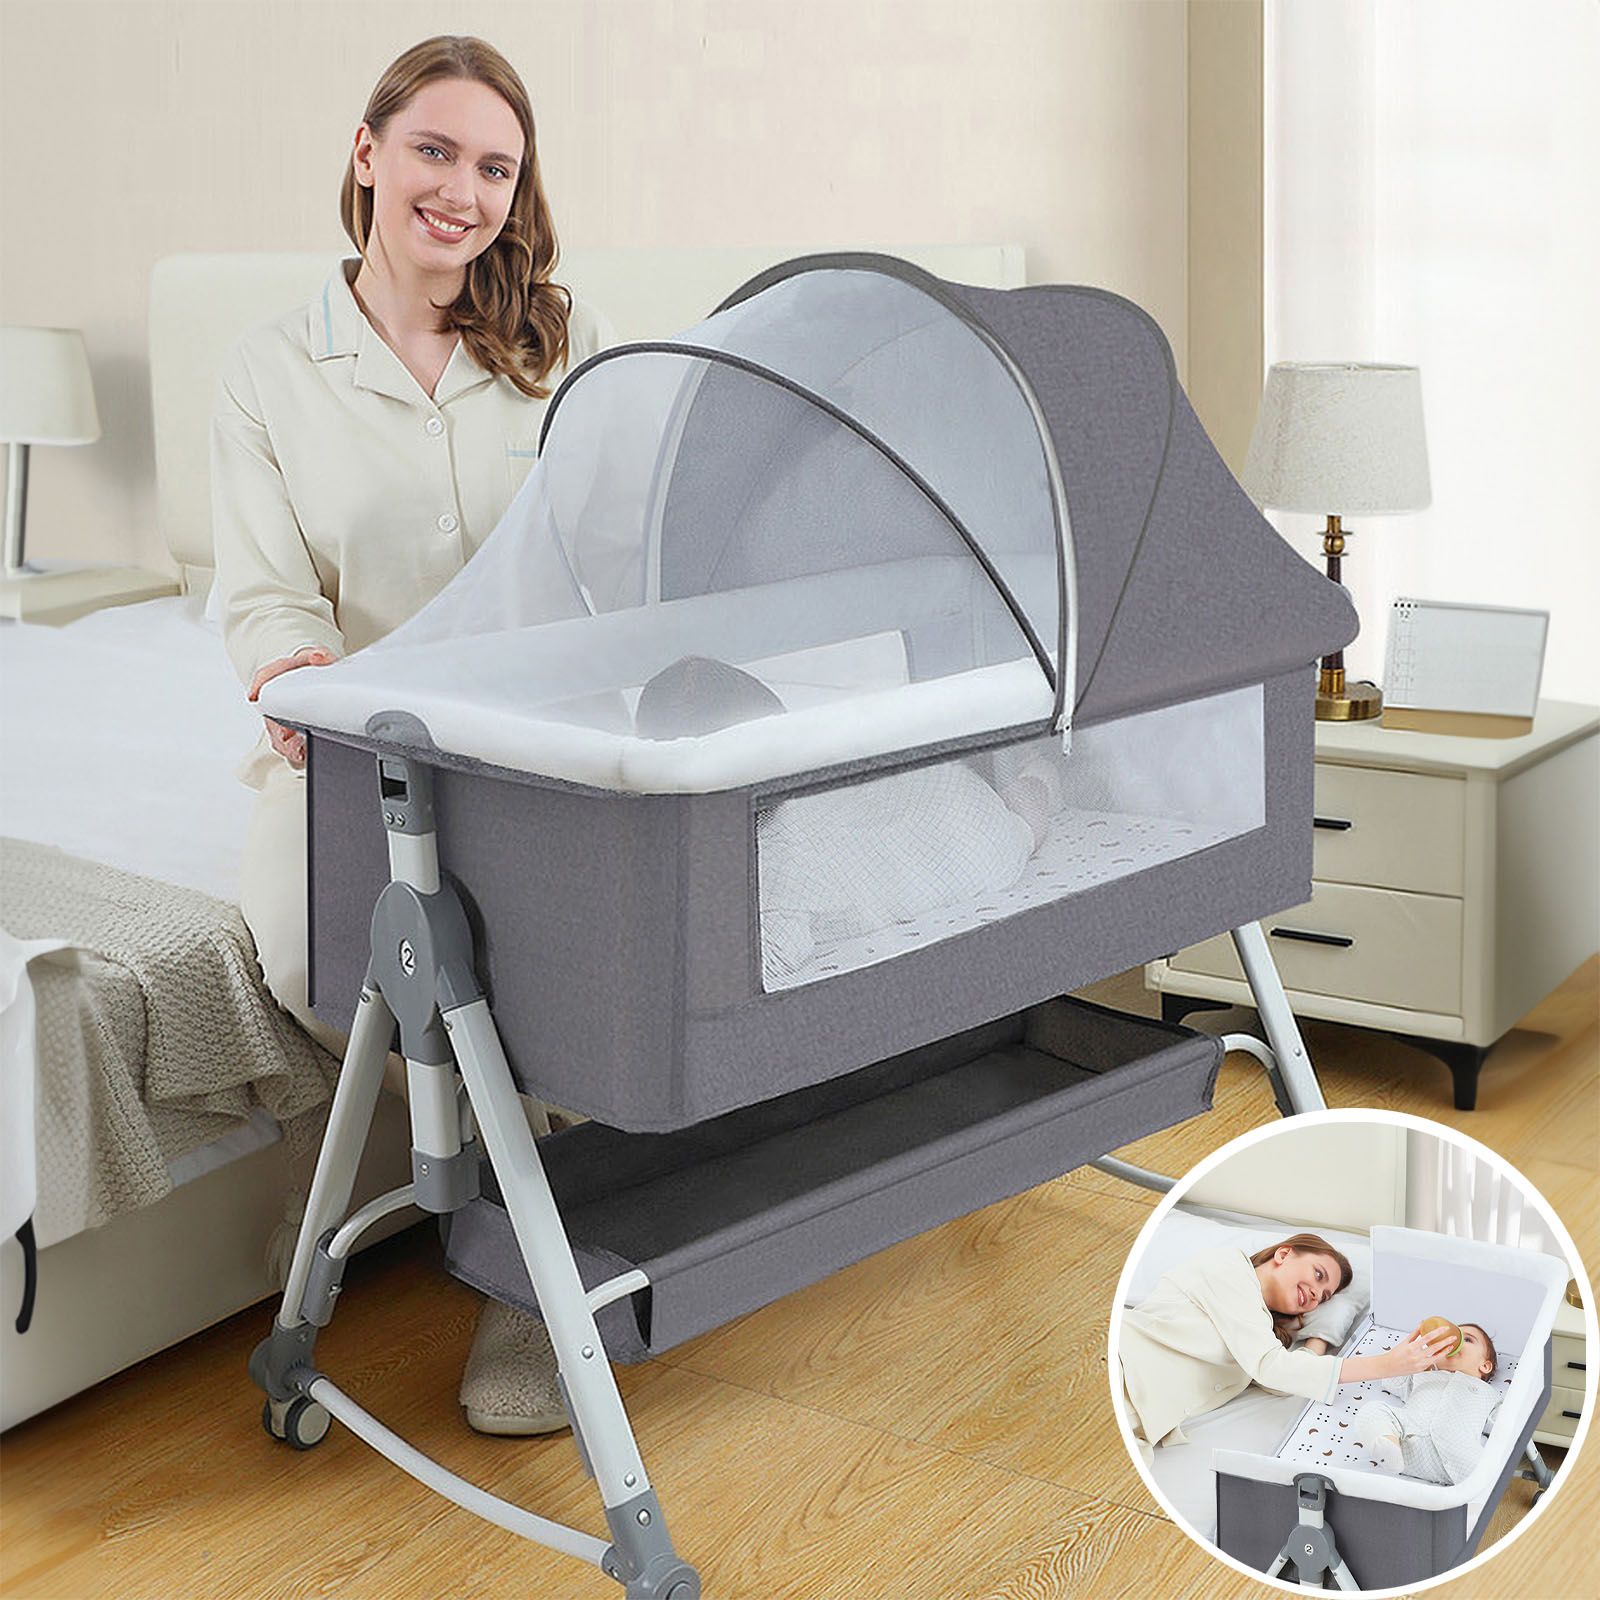 EONROACOO Foldable Baby Bassinet with Changing Table, Adjustable Bedside Crib for Infant, Gray - image 1 of 11